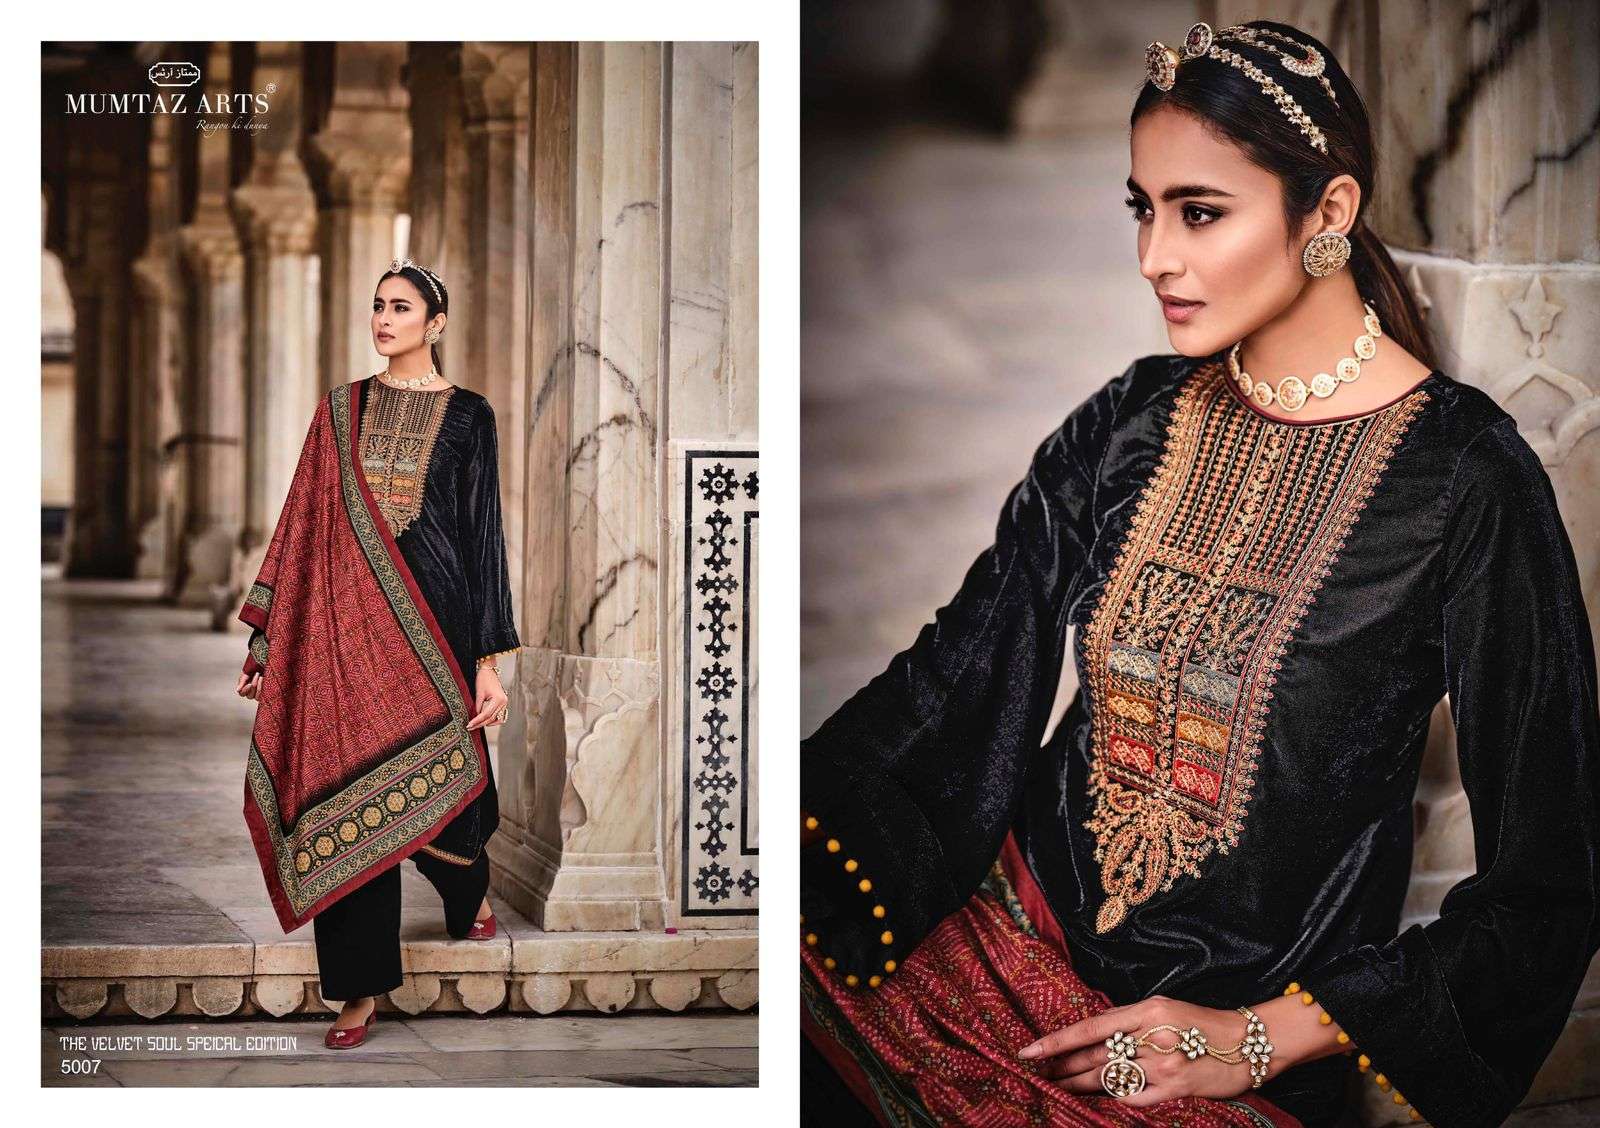 Mumtaz arts Velvet special soul edition designer premium Velvet suits with heavy embroidery and heavy dupatta in wholesale rate. 